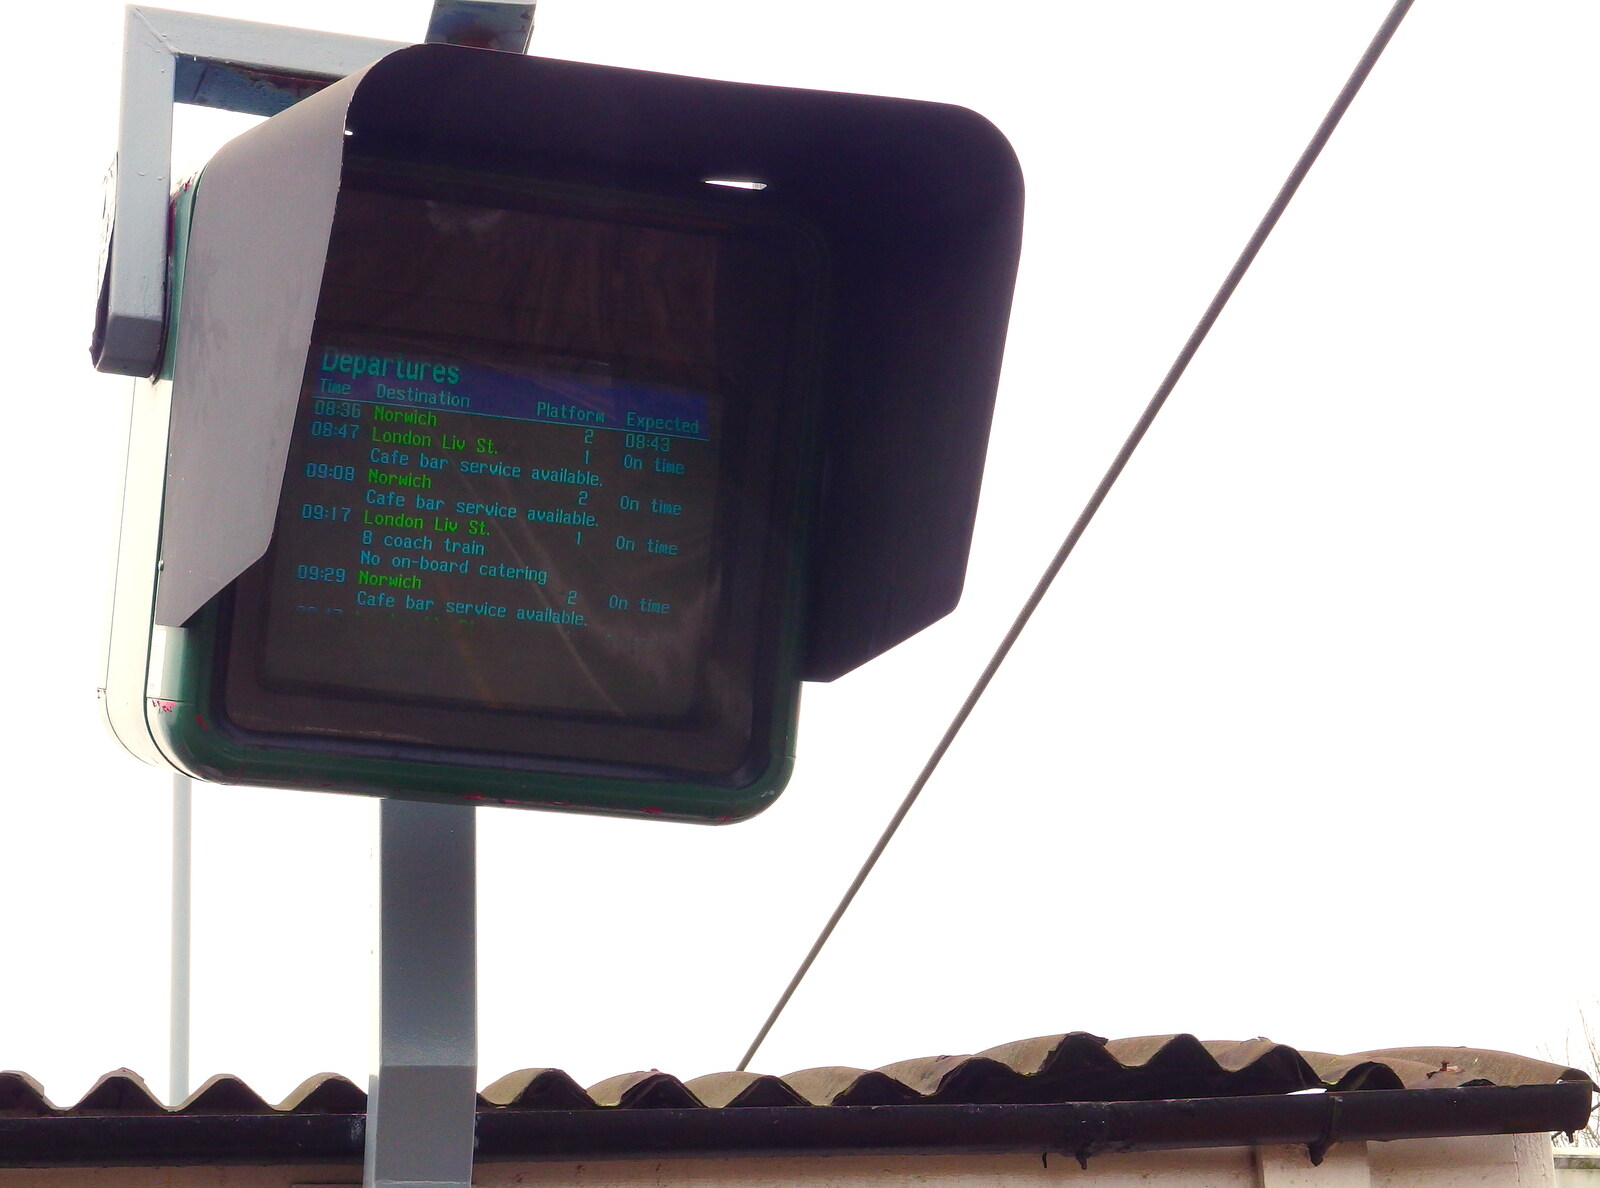 One of the last CRT monitors at Diss Station from Emily Comes to Visit, Brome, Suffolk - 15th March 2014